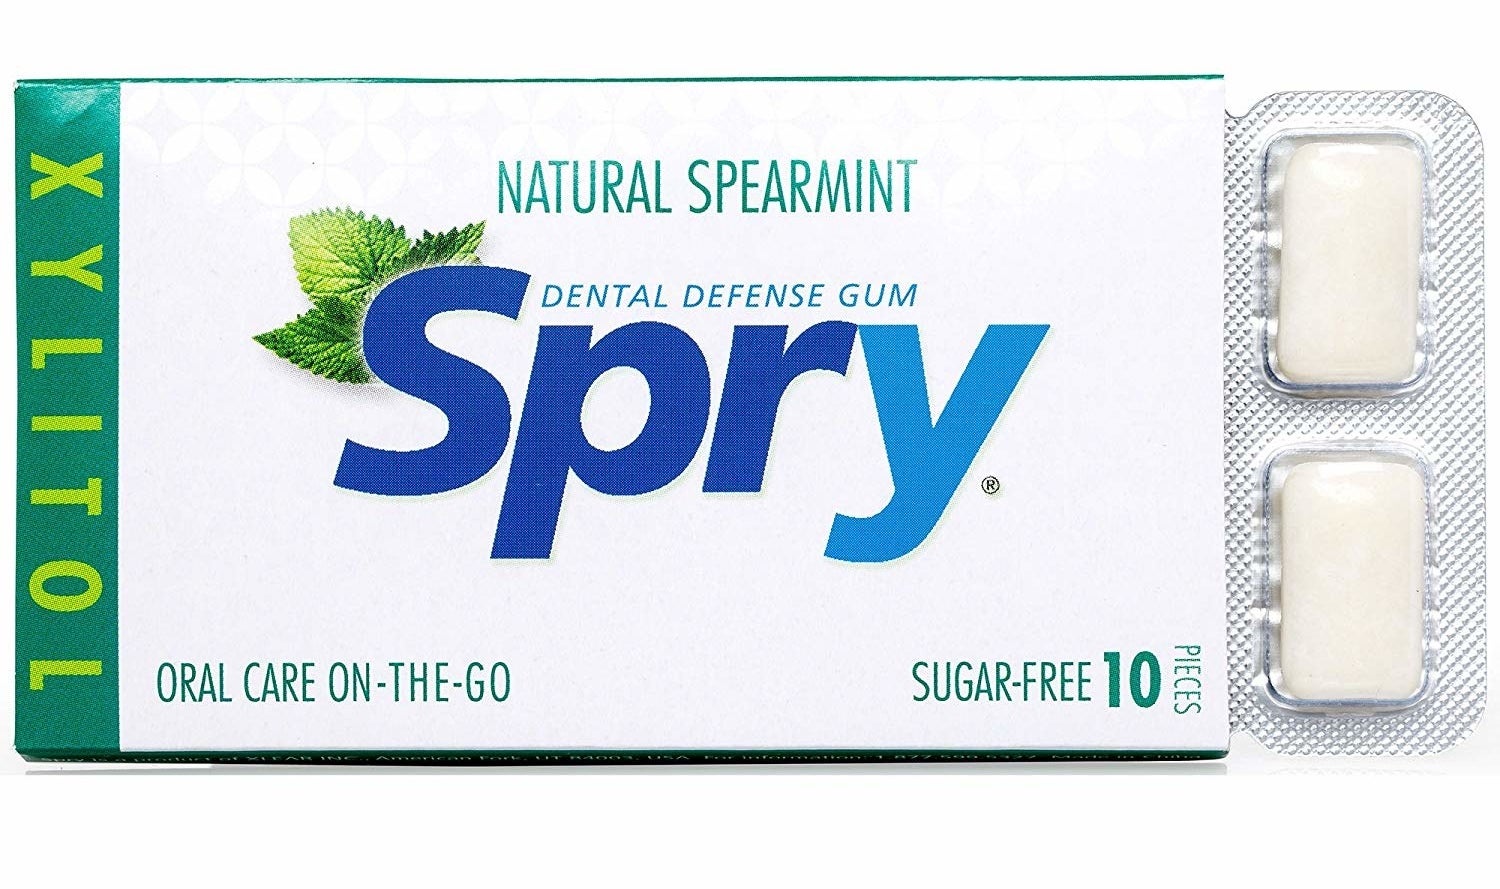 The pack of gum with small rectangular gum chiclets